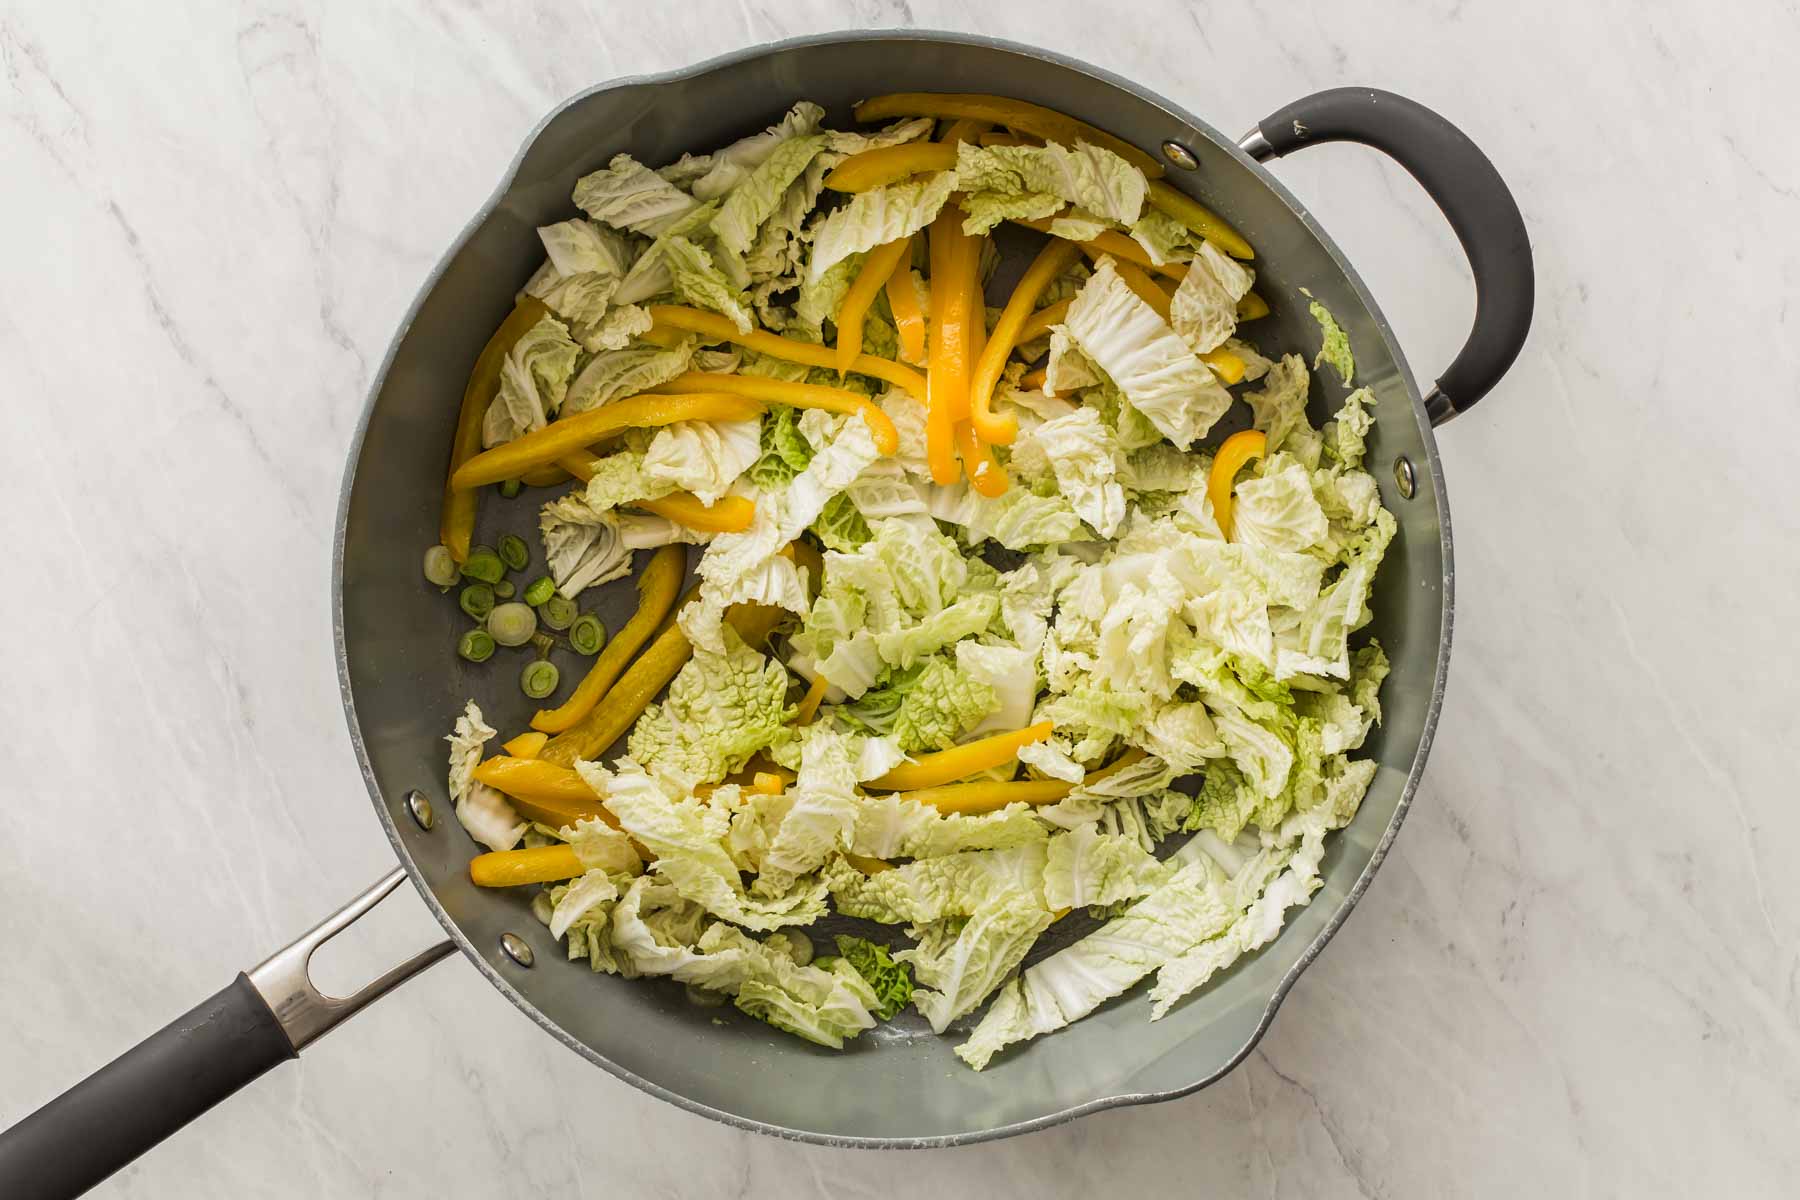 Grey skillet with cabbage, yellow bell pepper and green onions cooking.